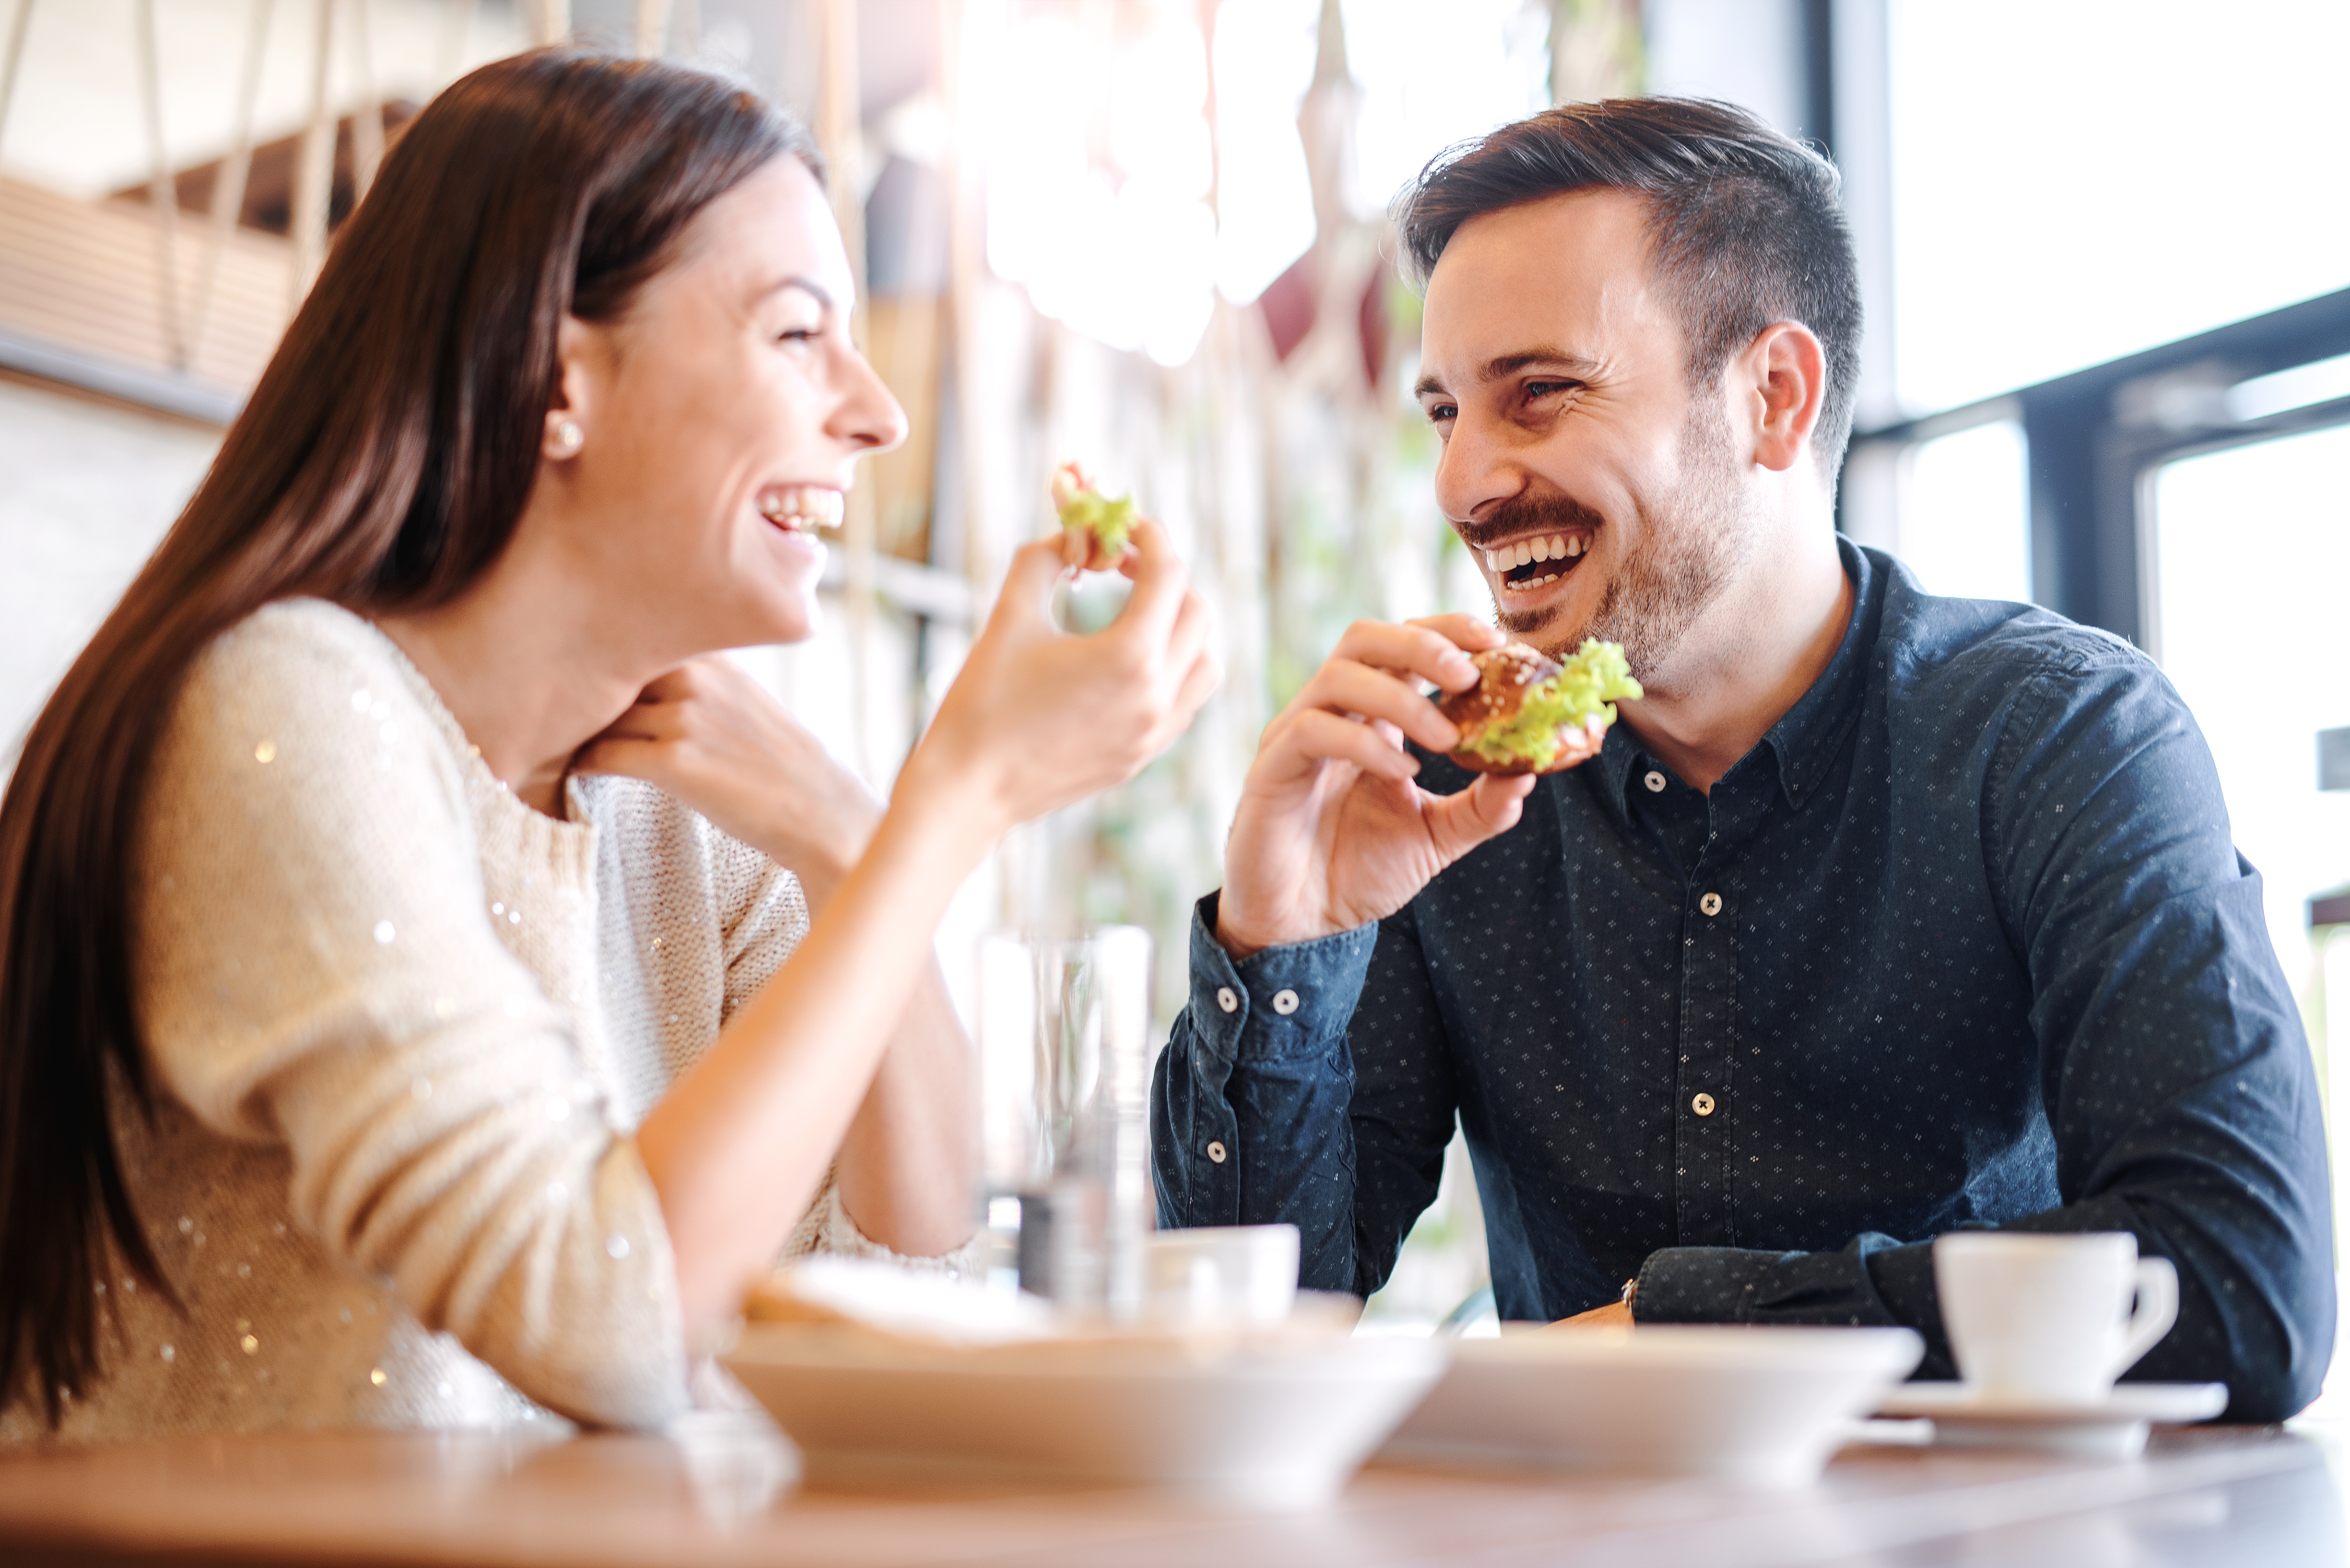 A happy couple enjoying food in a restaurant | Source: Shutterstock